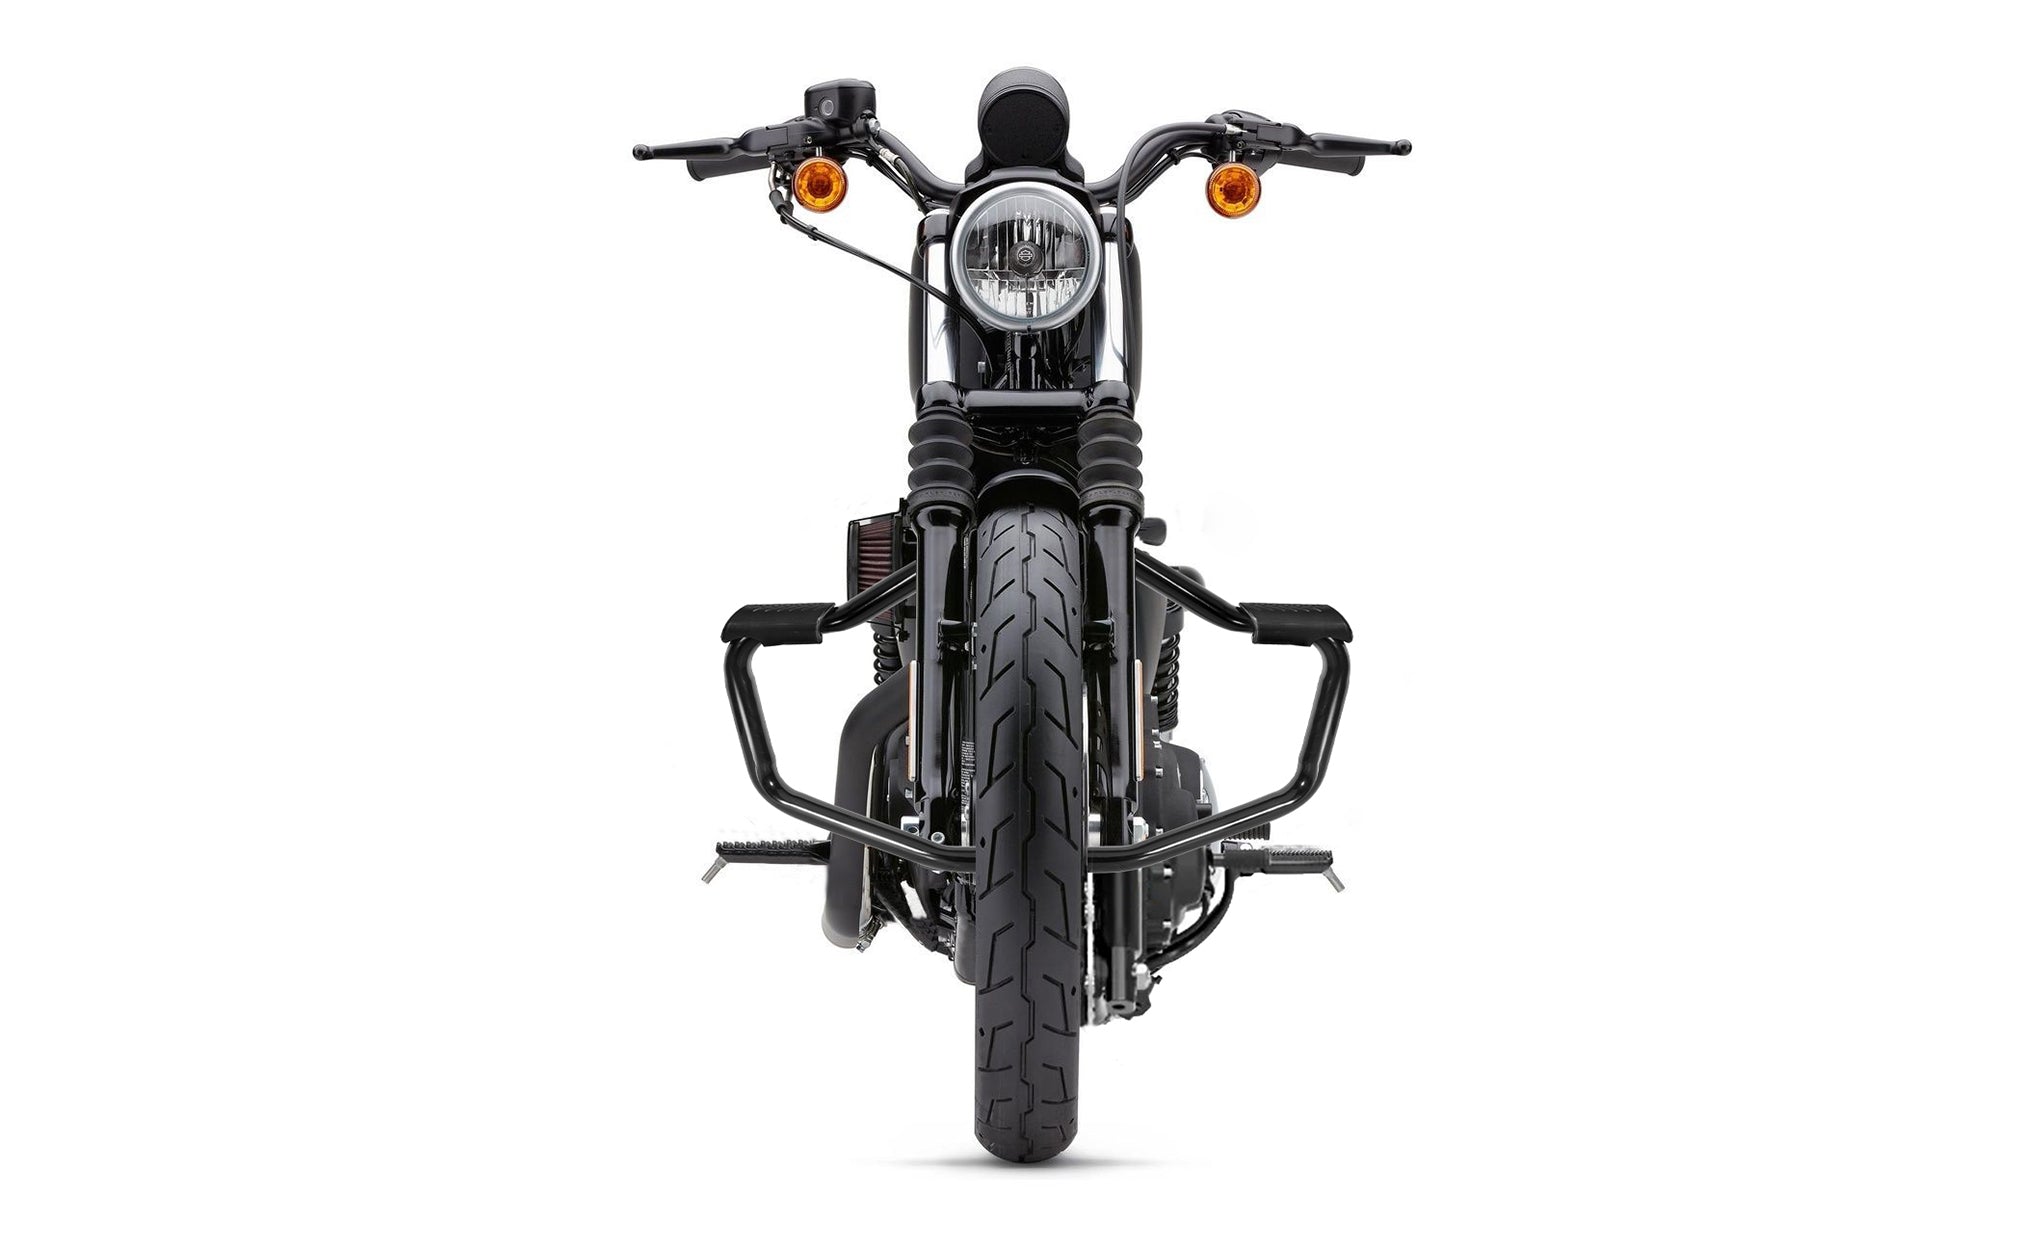 Viking Iron Born Motorcycle Crash Bar/Engine Guard for Harley Sportster Forty Eight Gloss Black Bag on Bike View @expand